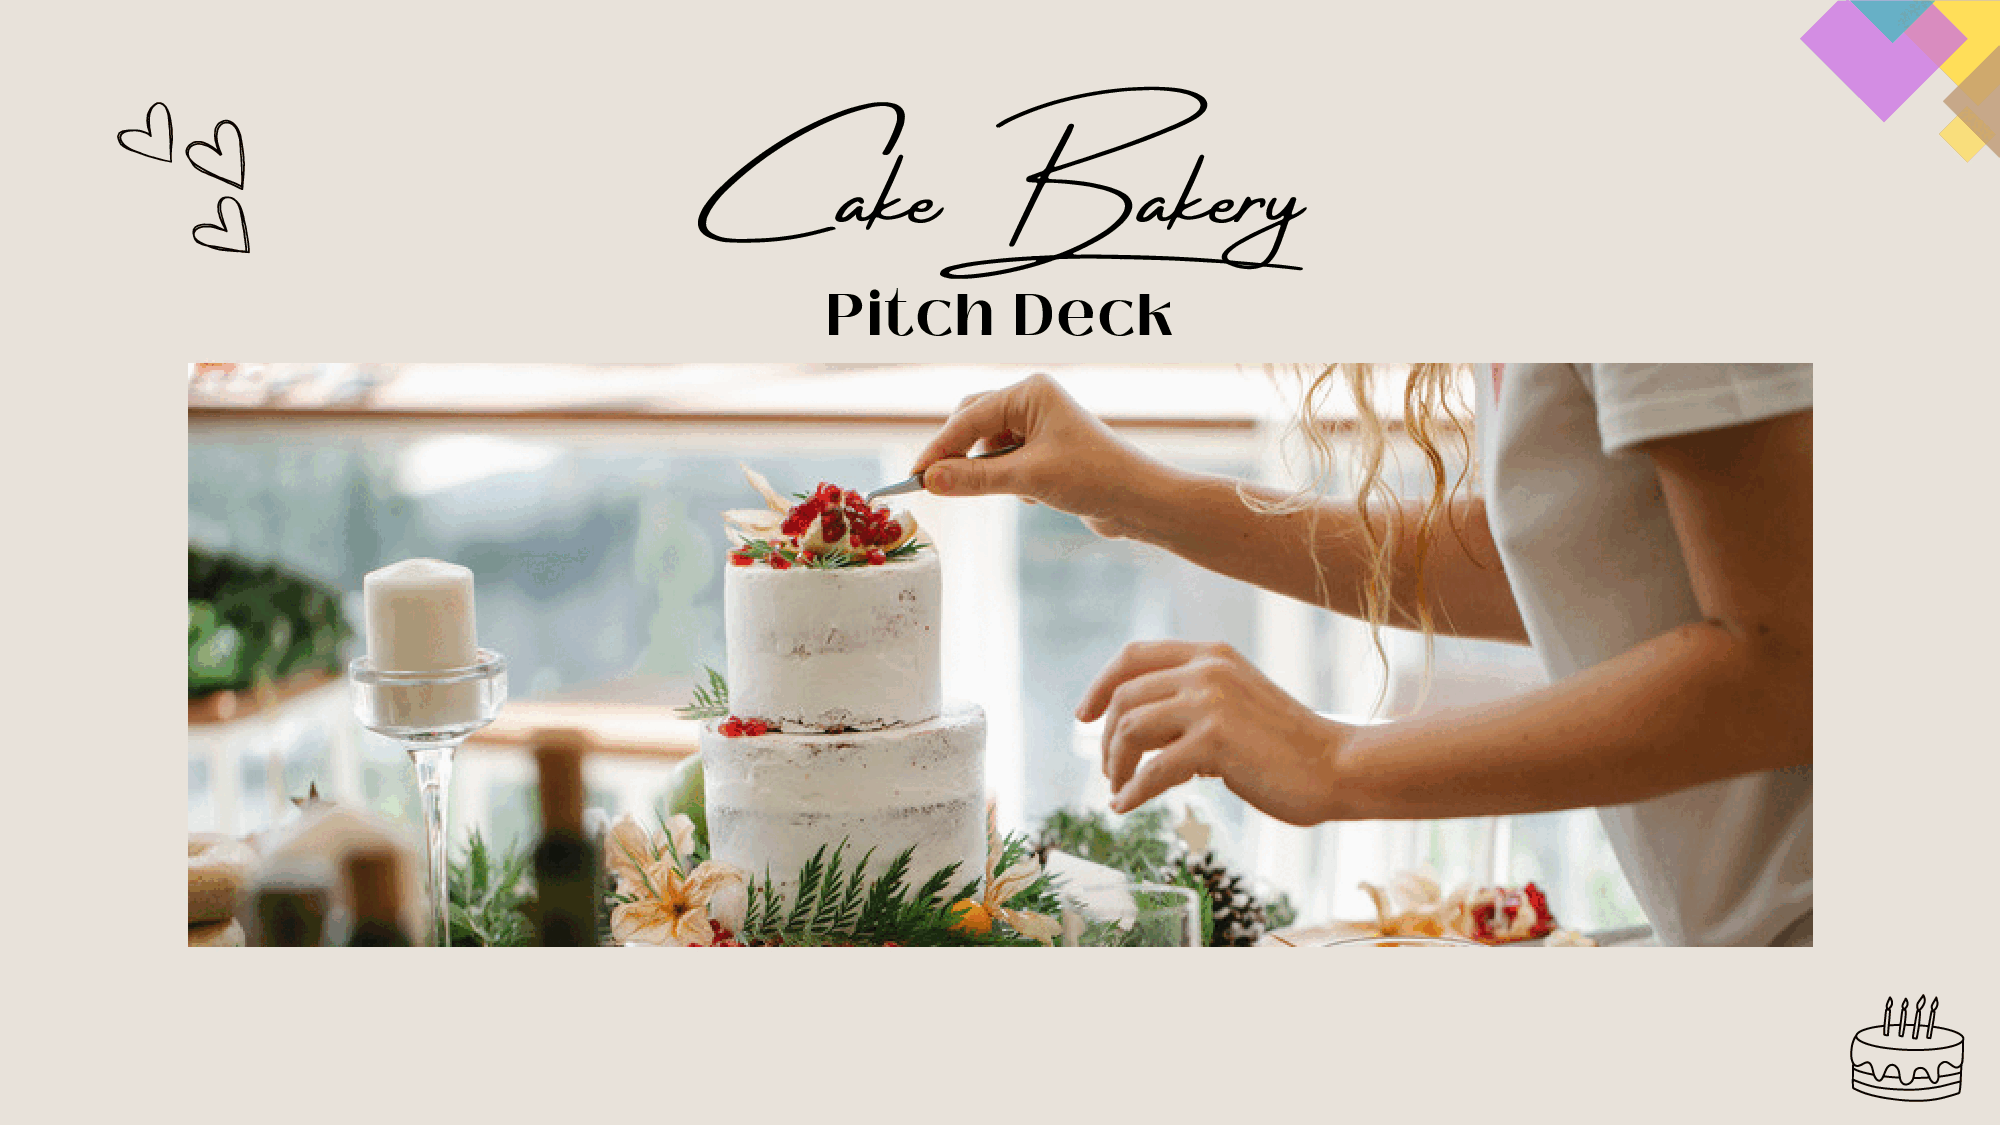 Cake Bakery Pitch Deck Template (31-slide PPT PowerPoint presentation (PPTX)) Preview Image